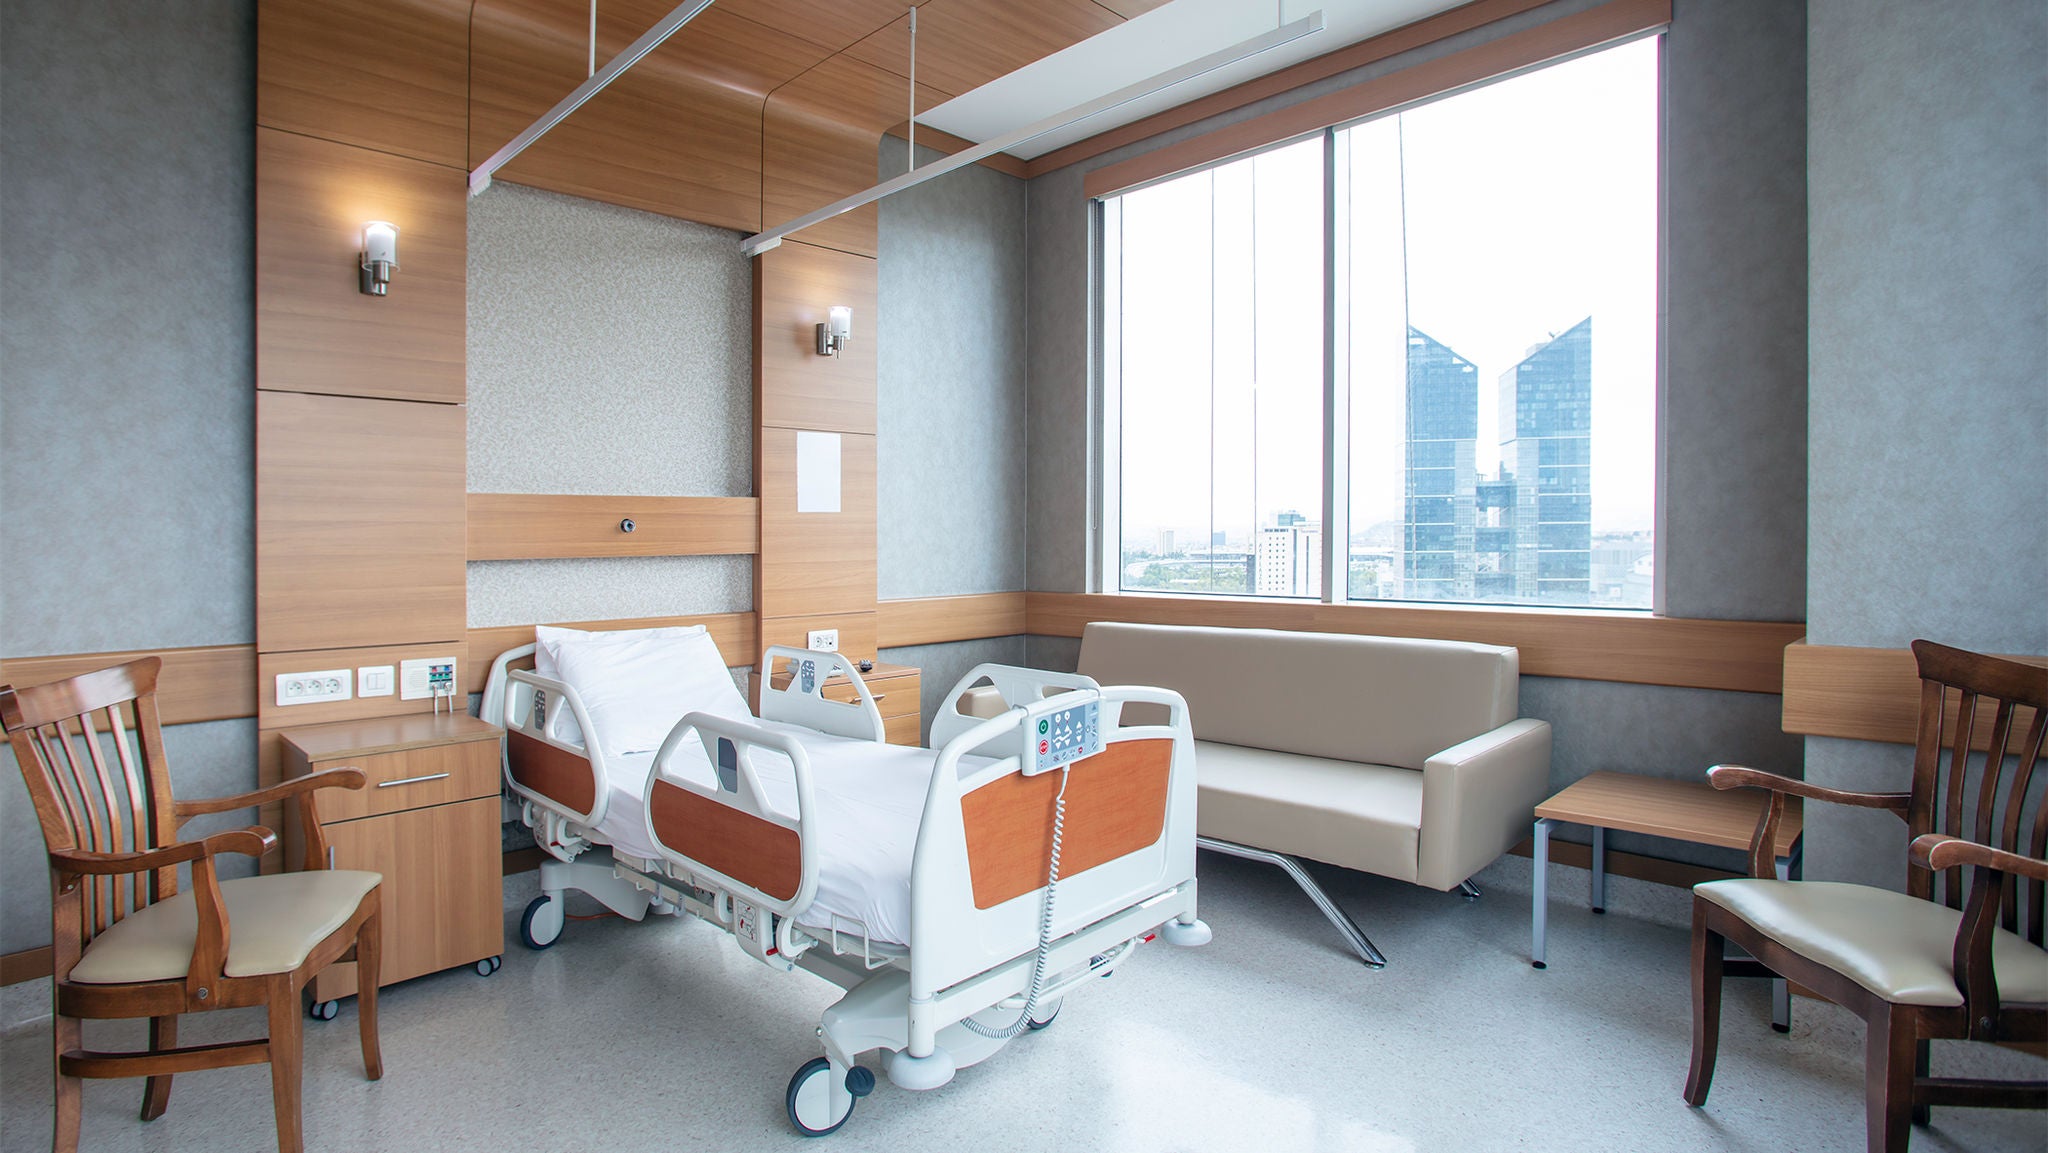 Lighting and Controls Healthcare